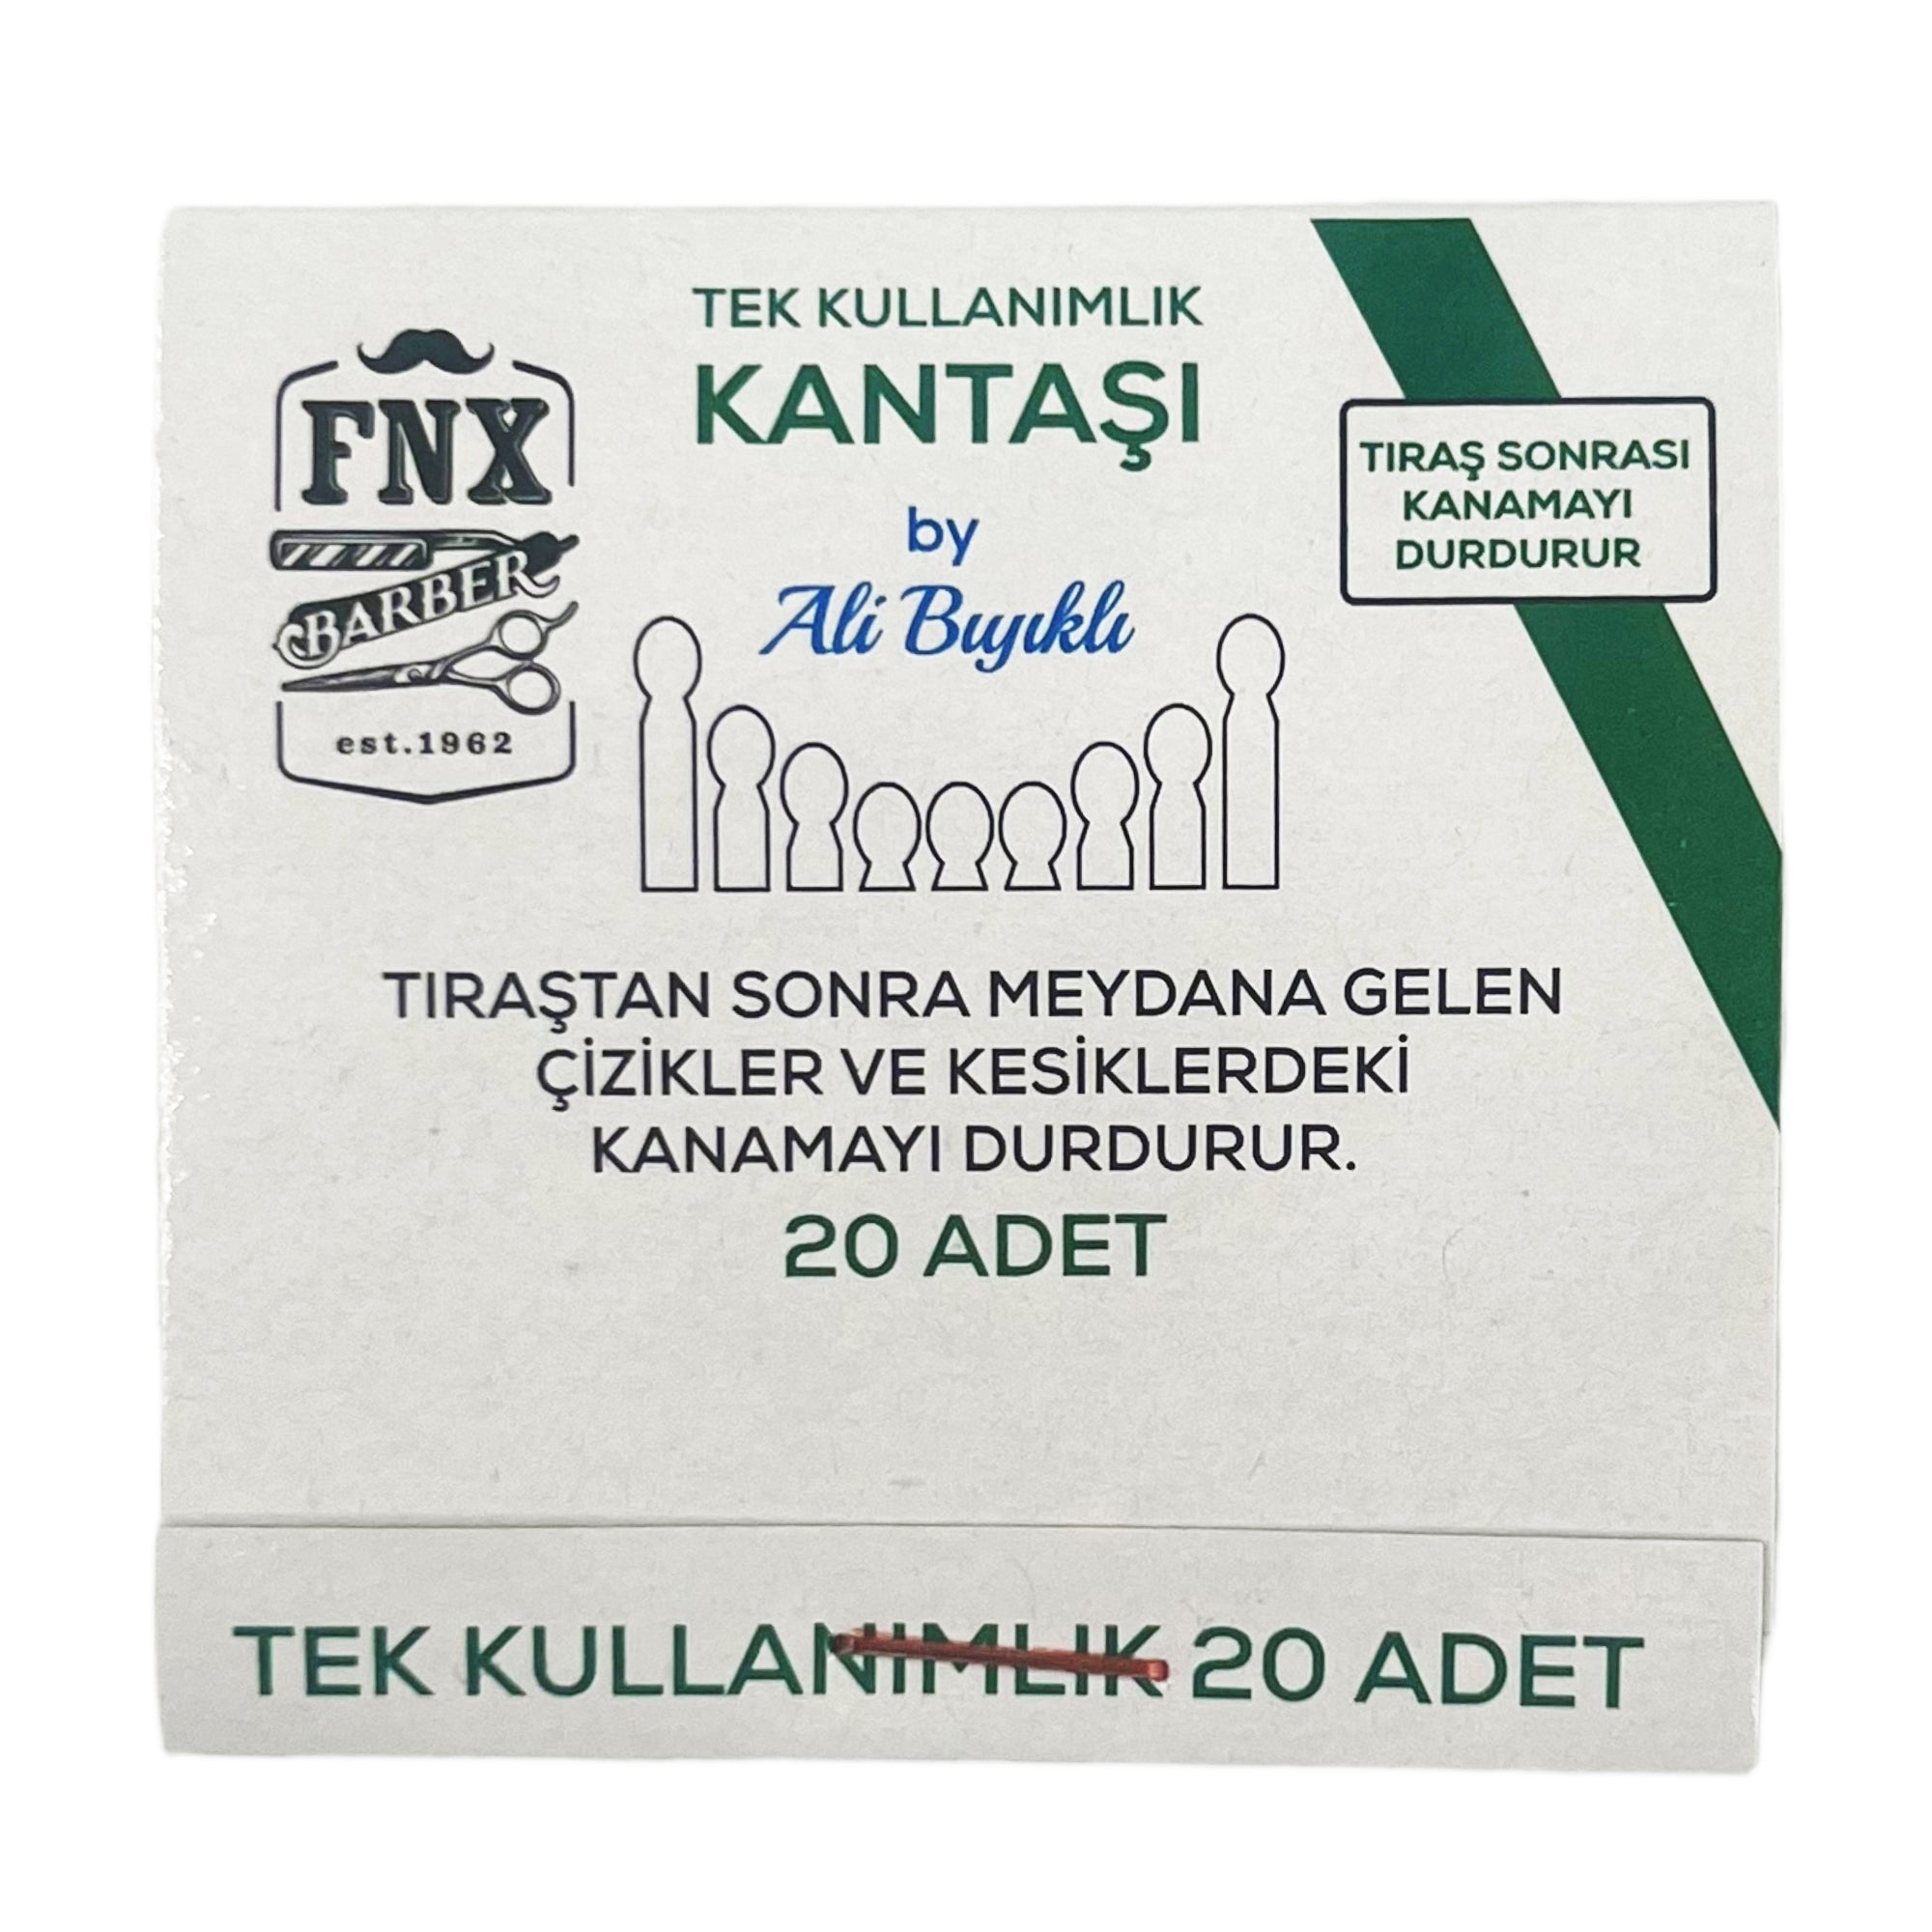 FNX Barber - Styptic Alum Matches After Shave Blood Stopper by Ali Biyikli (20pcs)